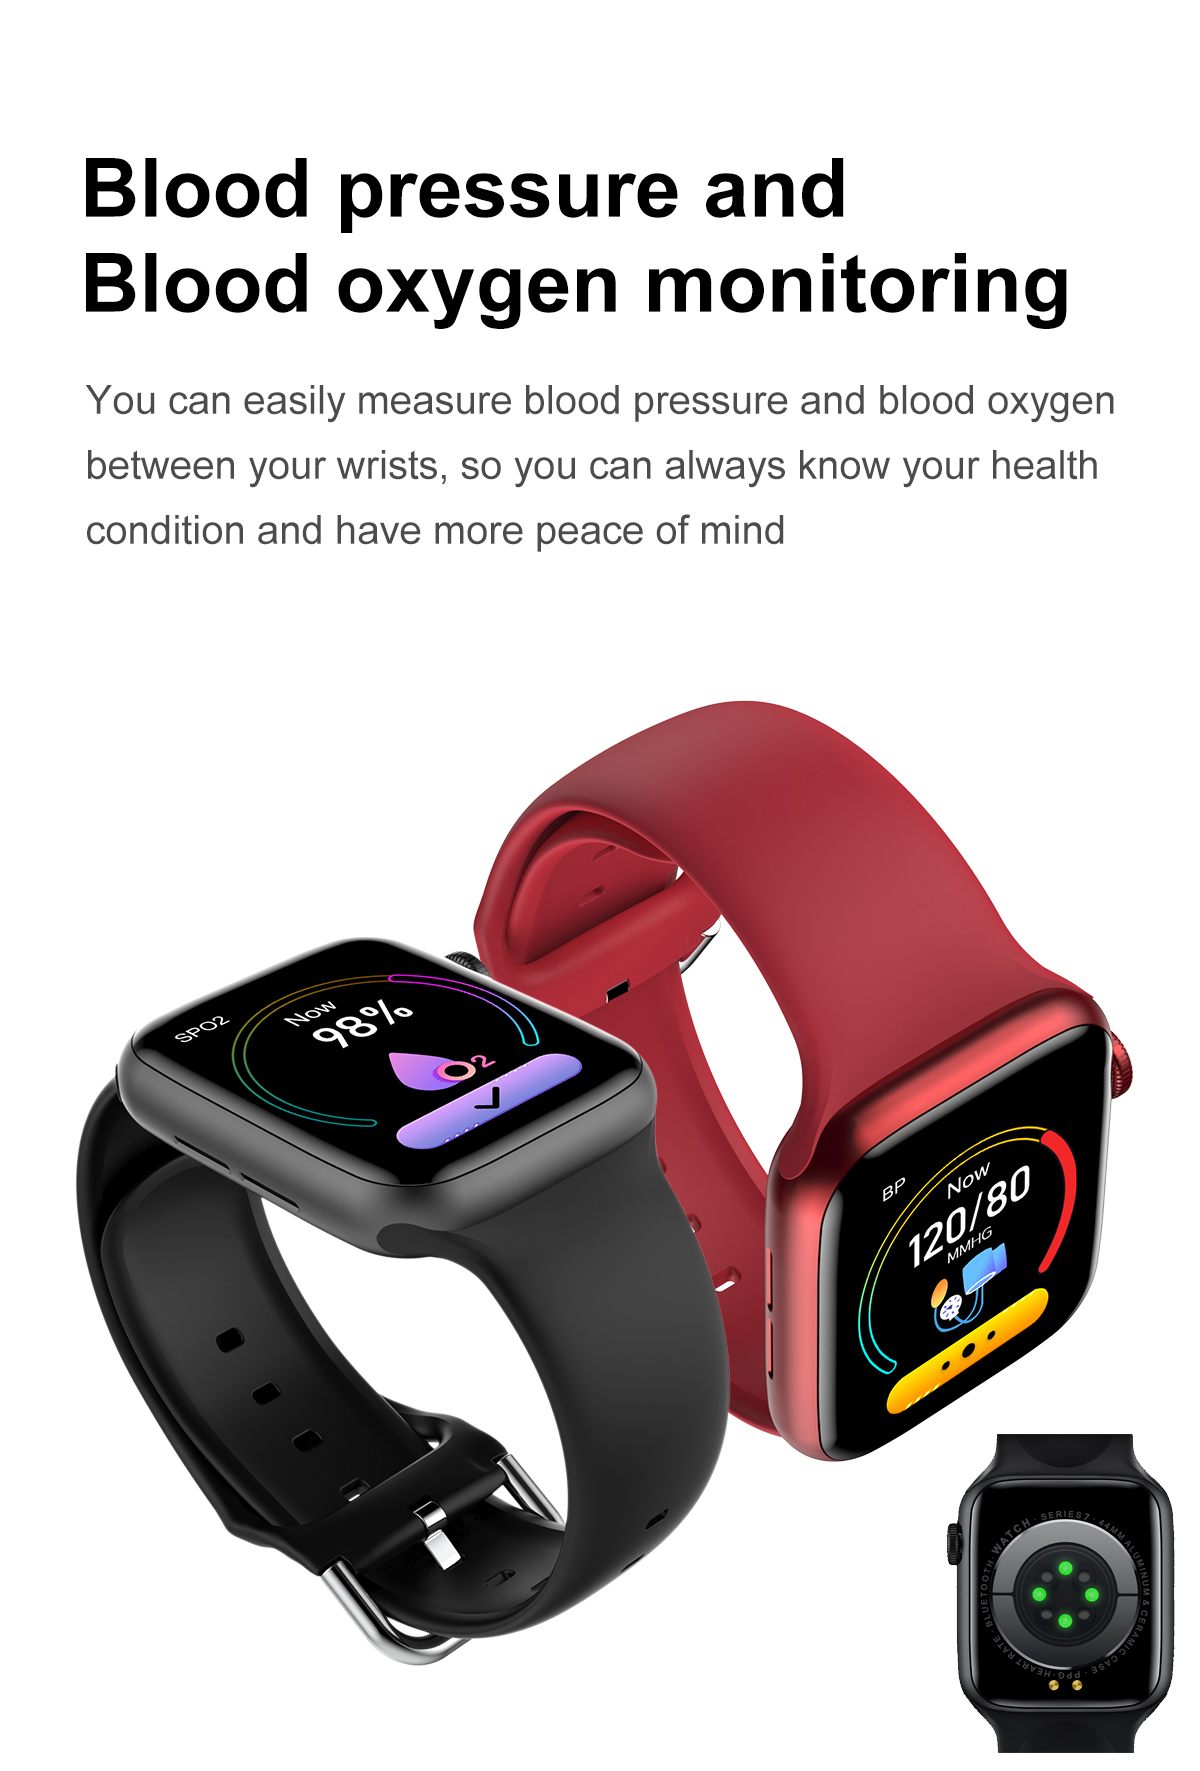 Smartwatch X8 MAX touch screen heart rate fitness tracker sleep monitor blood pressure smart watch for android/ios